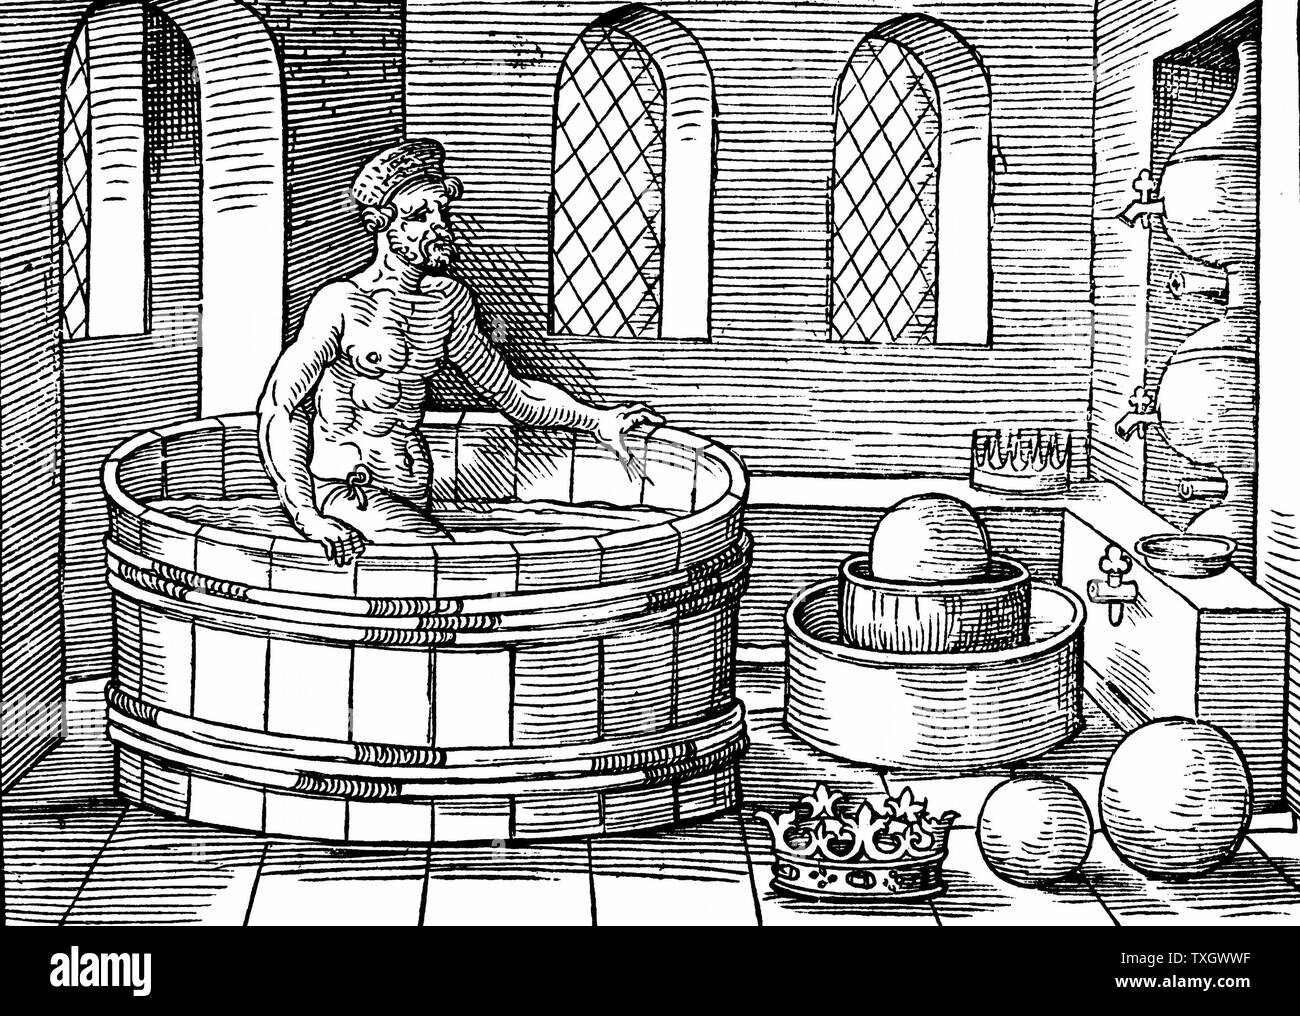 Archimedes (c287-212 BC) Ancient Greek mathematician and inventor in his bath. Discovered formulae for calculating areas and volumes of plane and solid figures.  Supposed to have shouted 'Eureka' on discovering principle of upthrust on a floating body.  1547 Woodcut Nuremberg Stock Photo